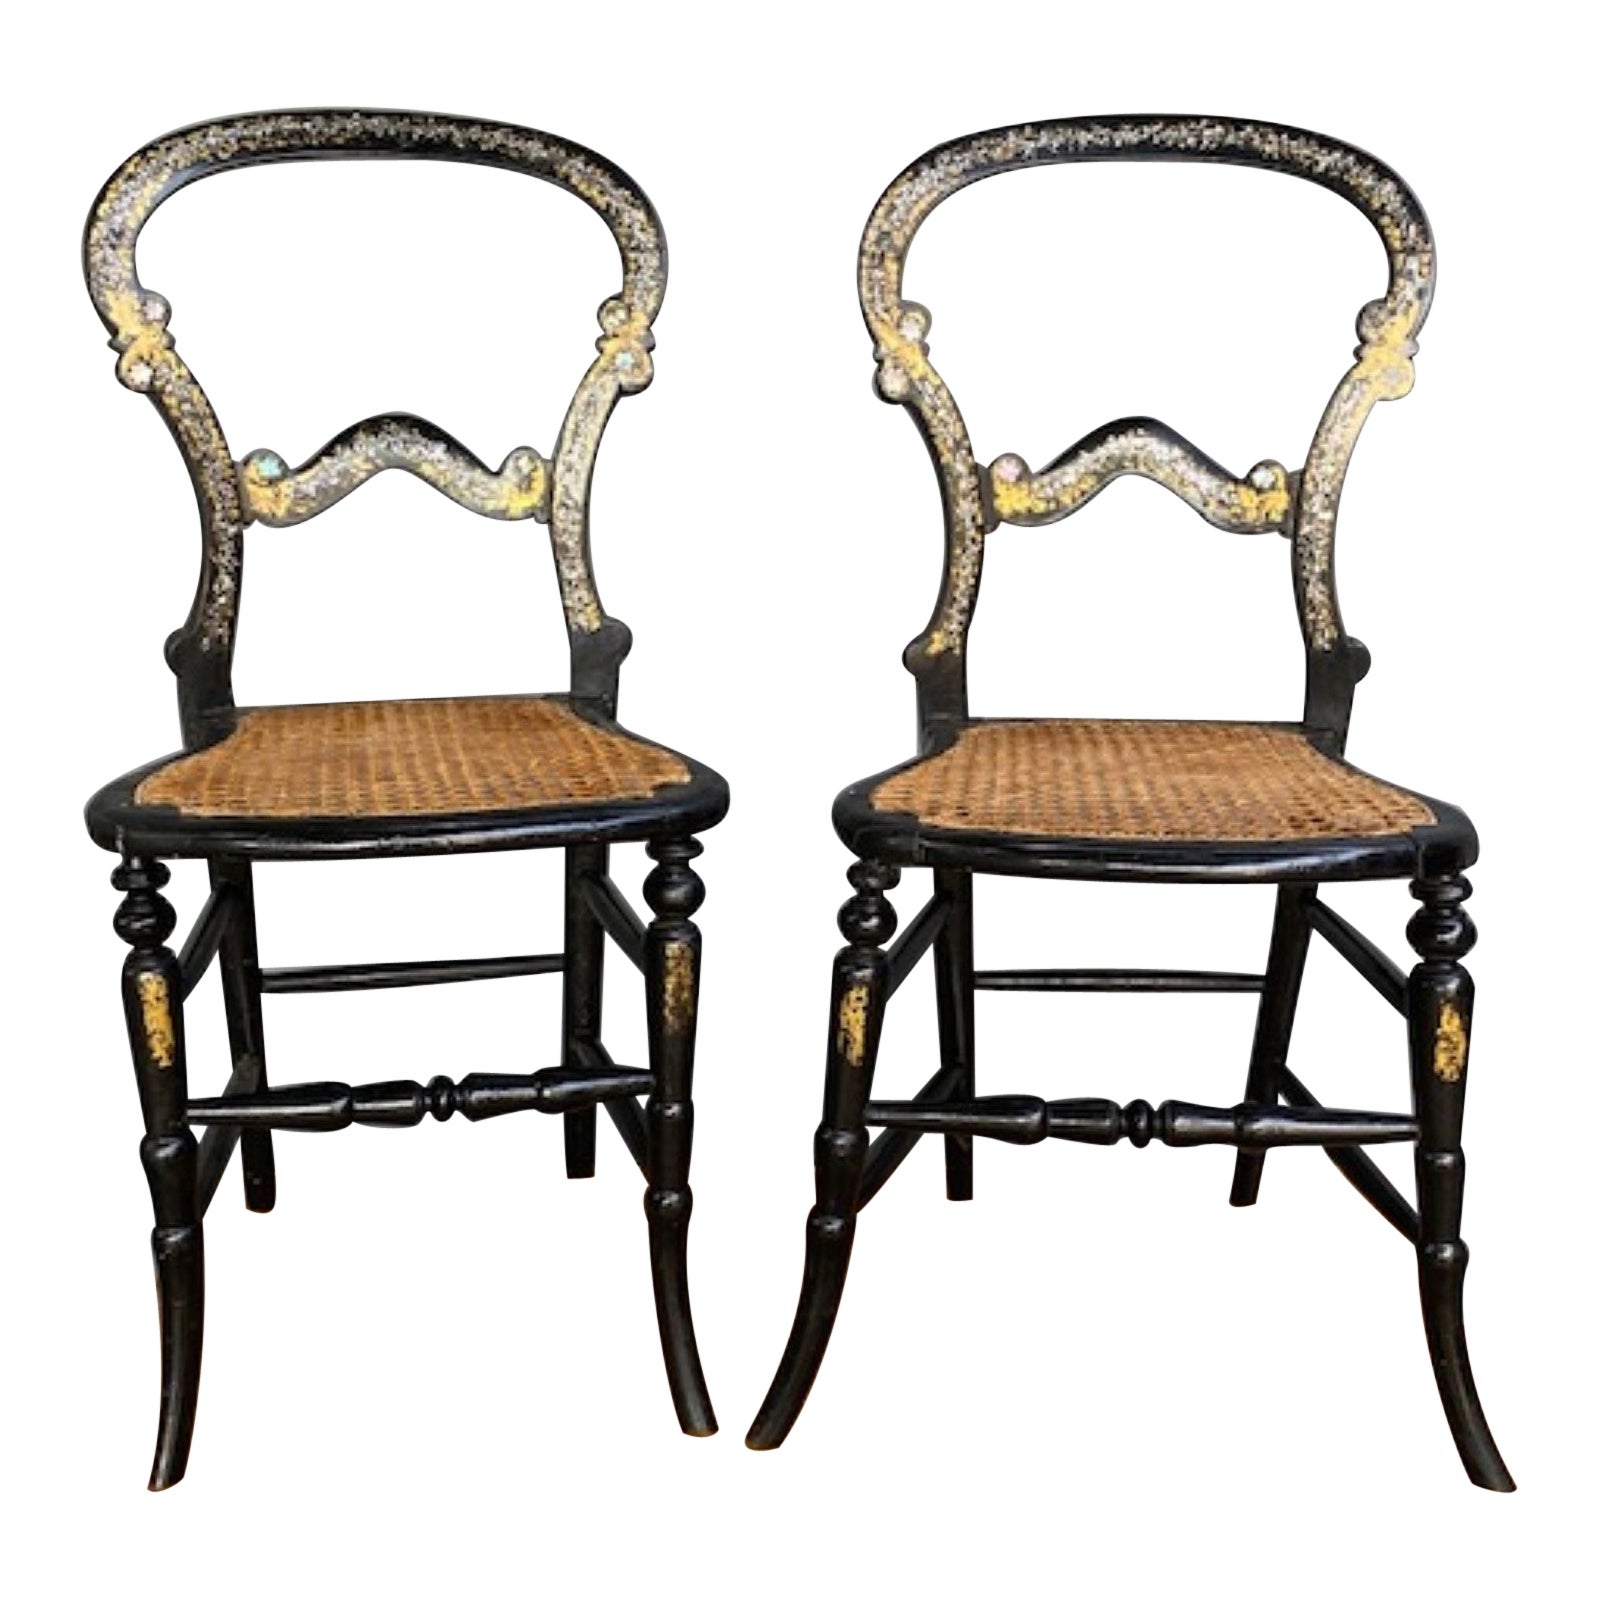 Pair of 19th Century. Antique English Victorian Ebonised Side Chairs, Circa 1860